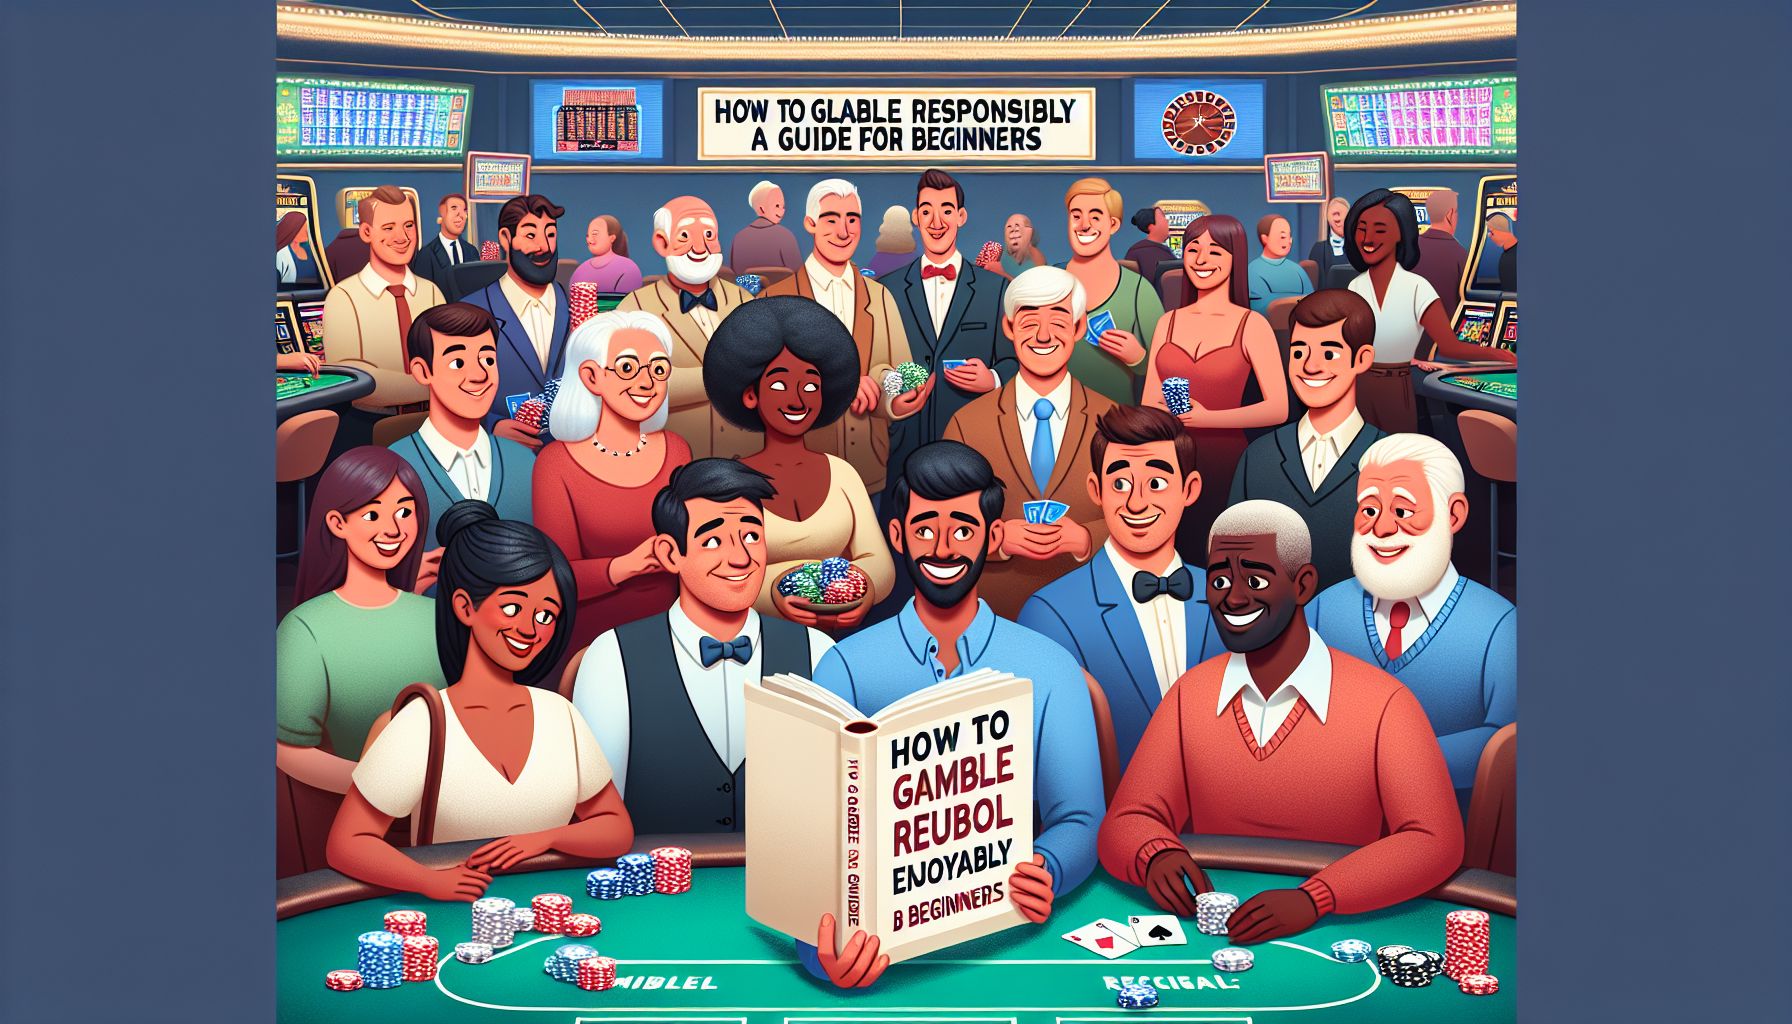 How to Gamble Responsibly and Enjoyably: A Guide for Beginners